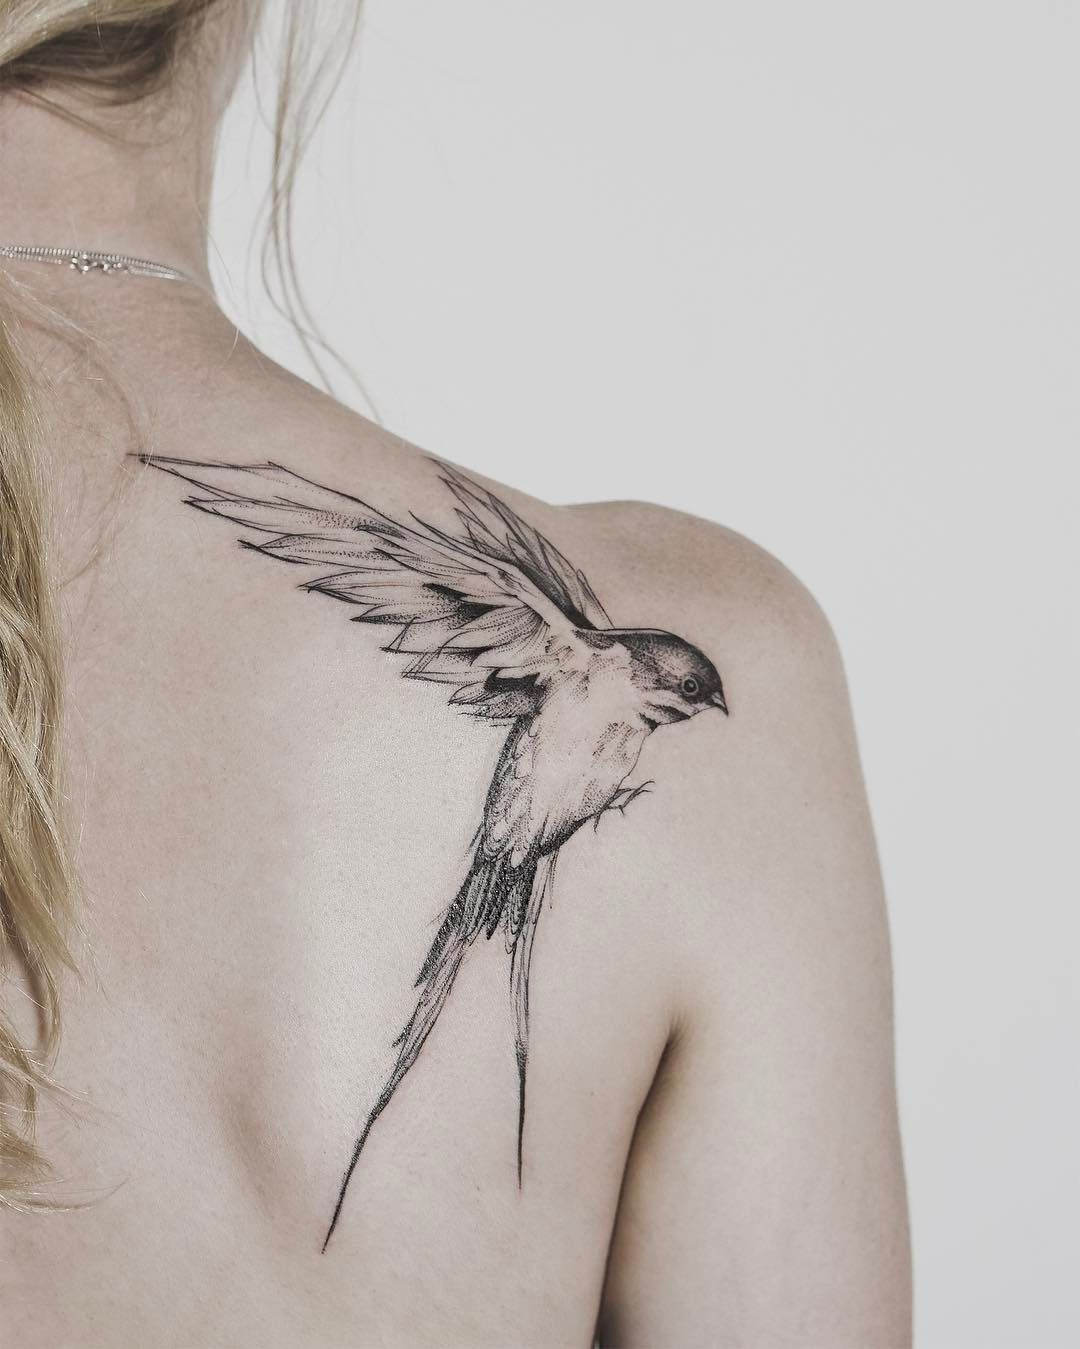 Bird Tattoos Meaning And Symbolism The Wild Tattoo Bird Tattoos with sizing 1080 X 1349